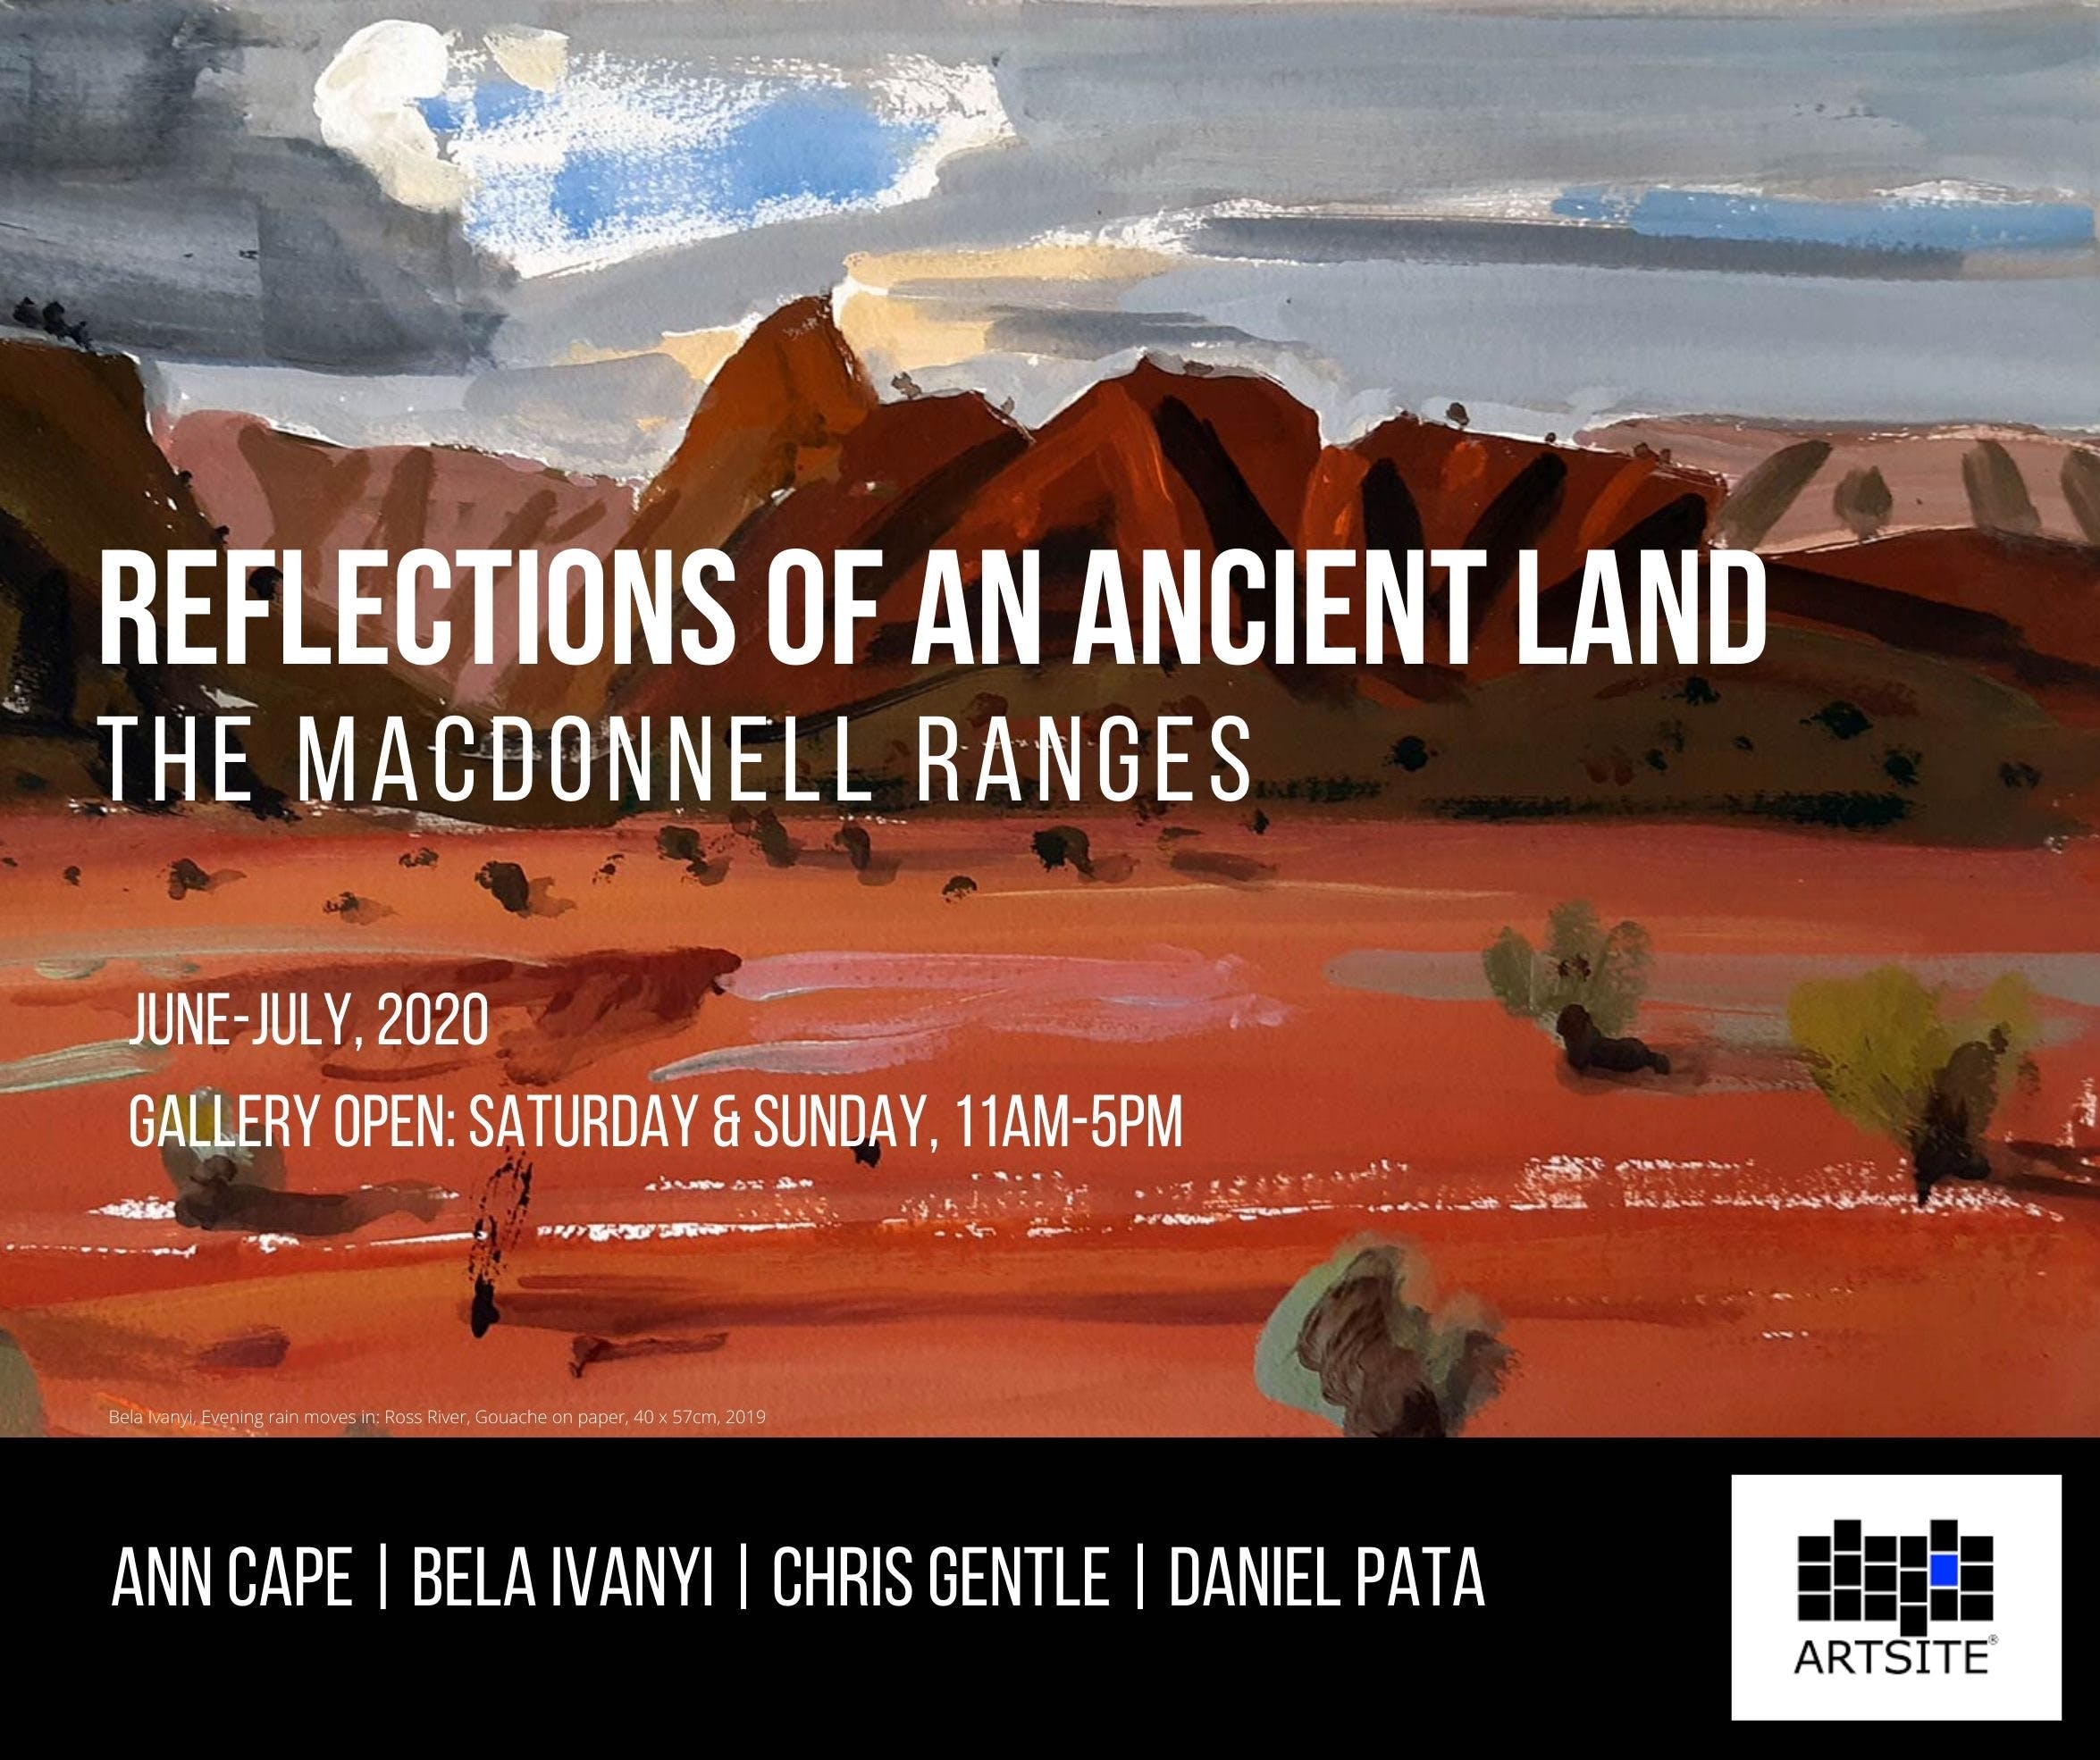 Reflections of An Ancient Land The MacDonnell Ranges - Tourism Canberra